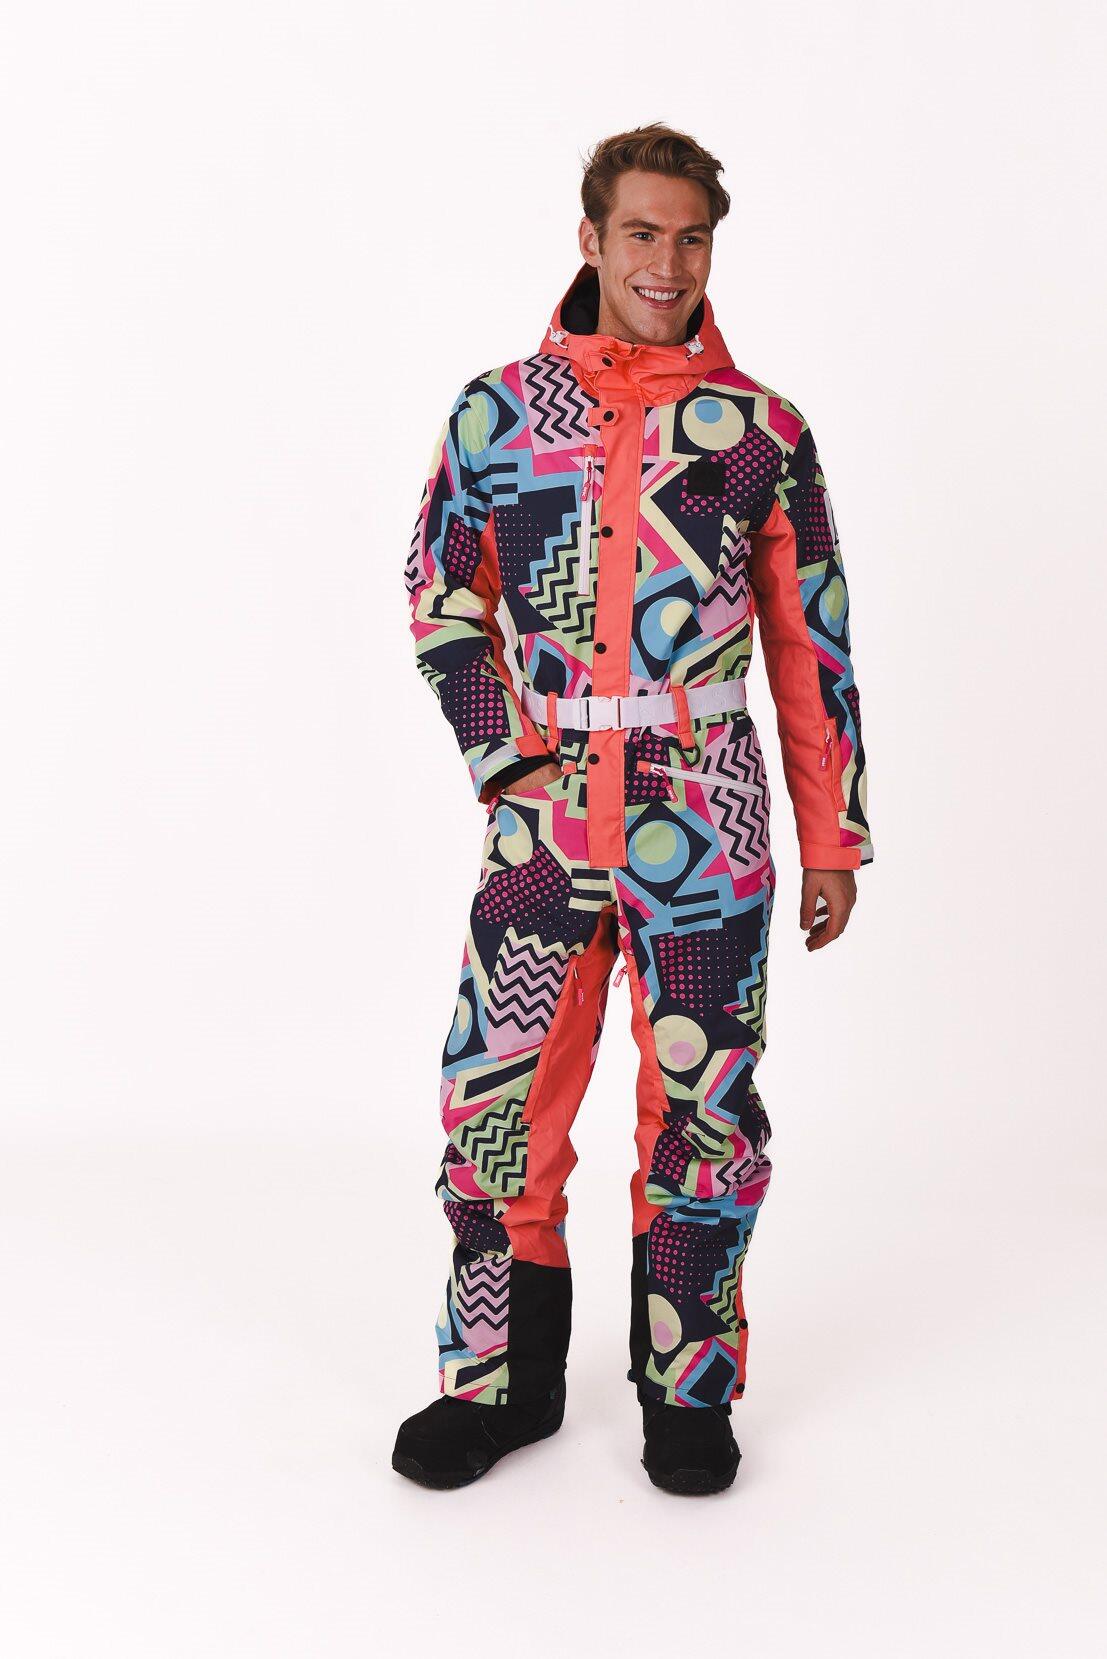 OOSC Saved by The Bell Men's Ski Suit